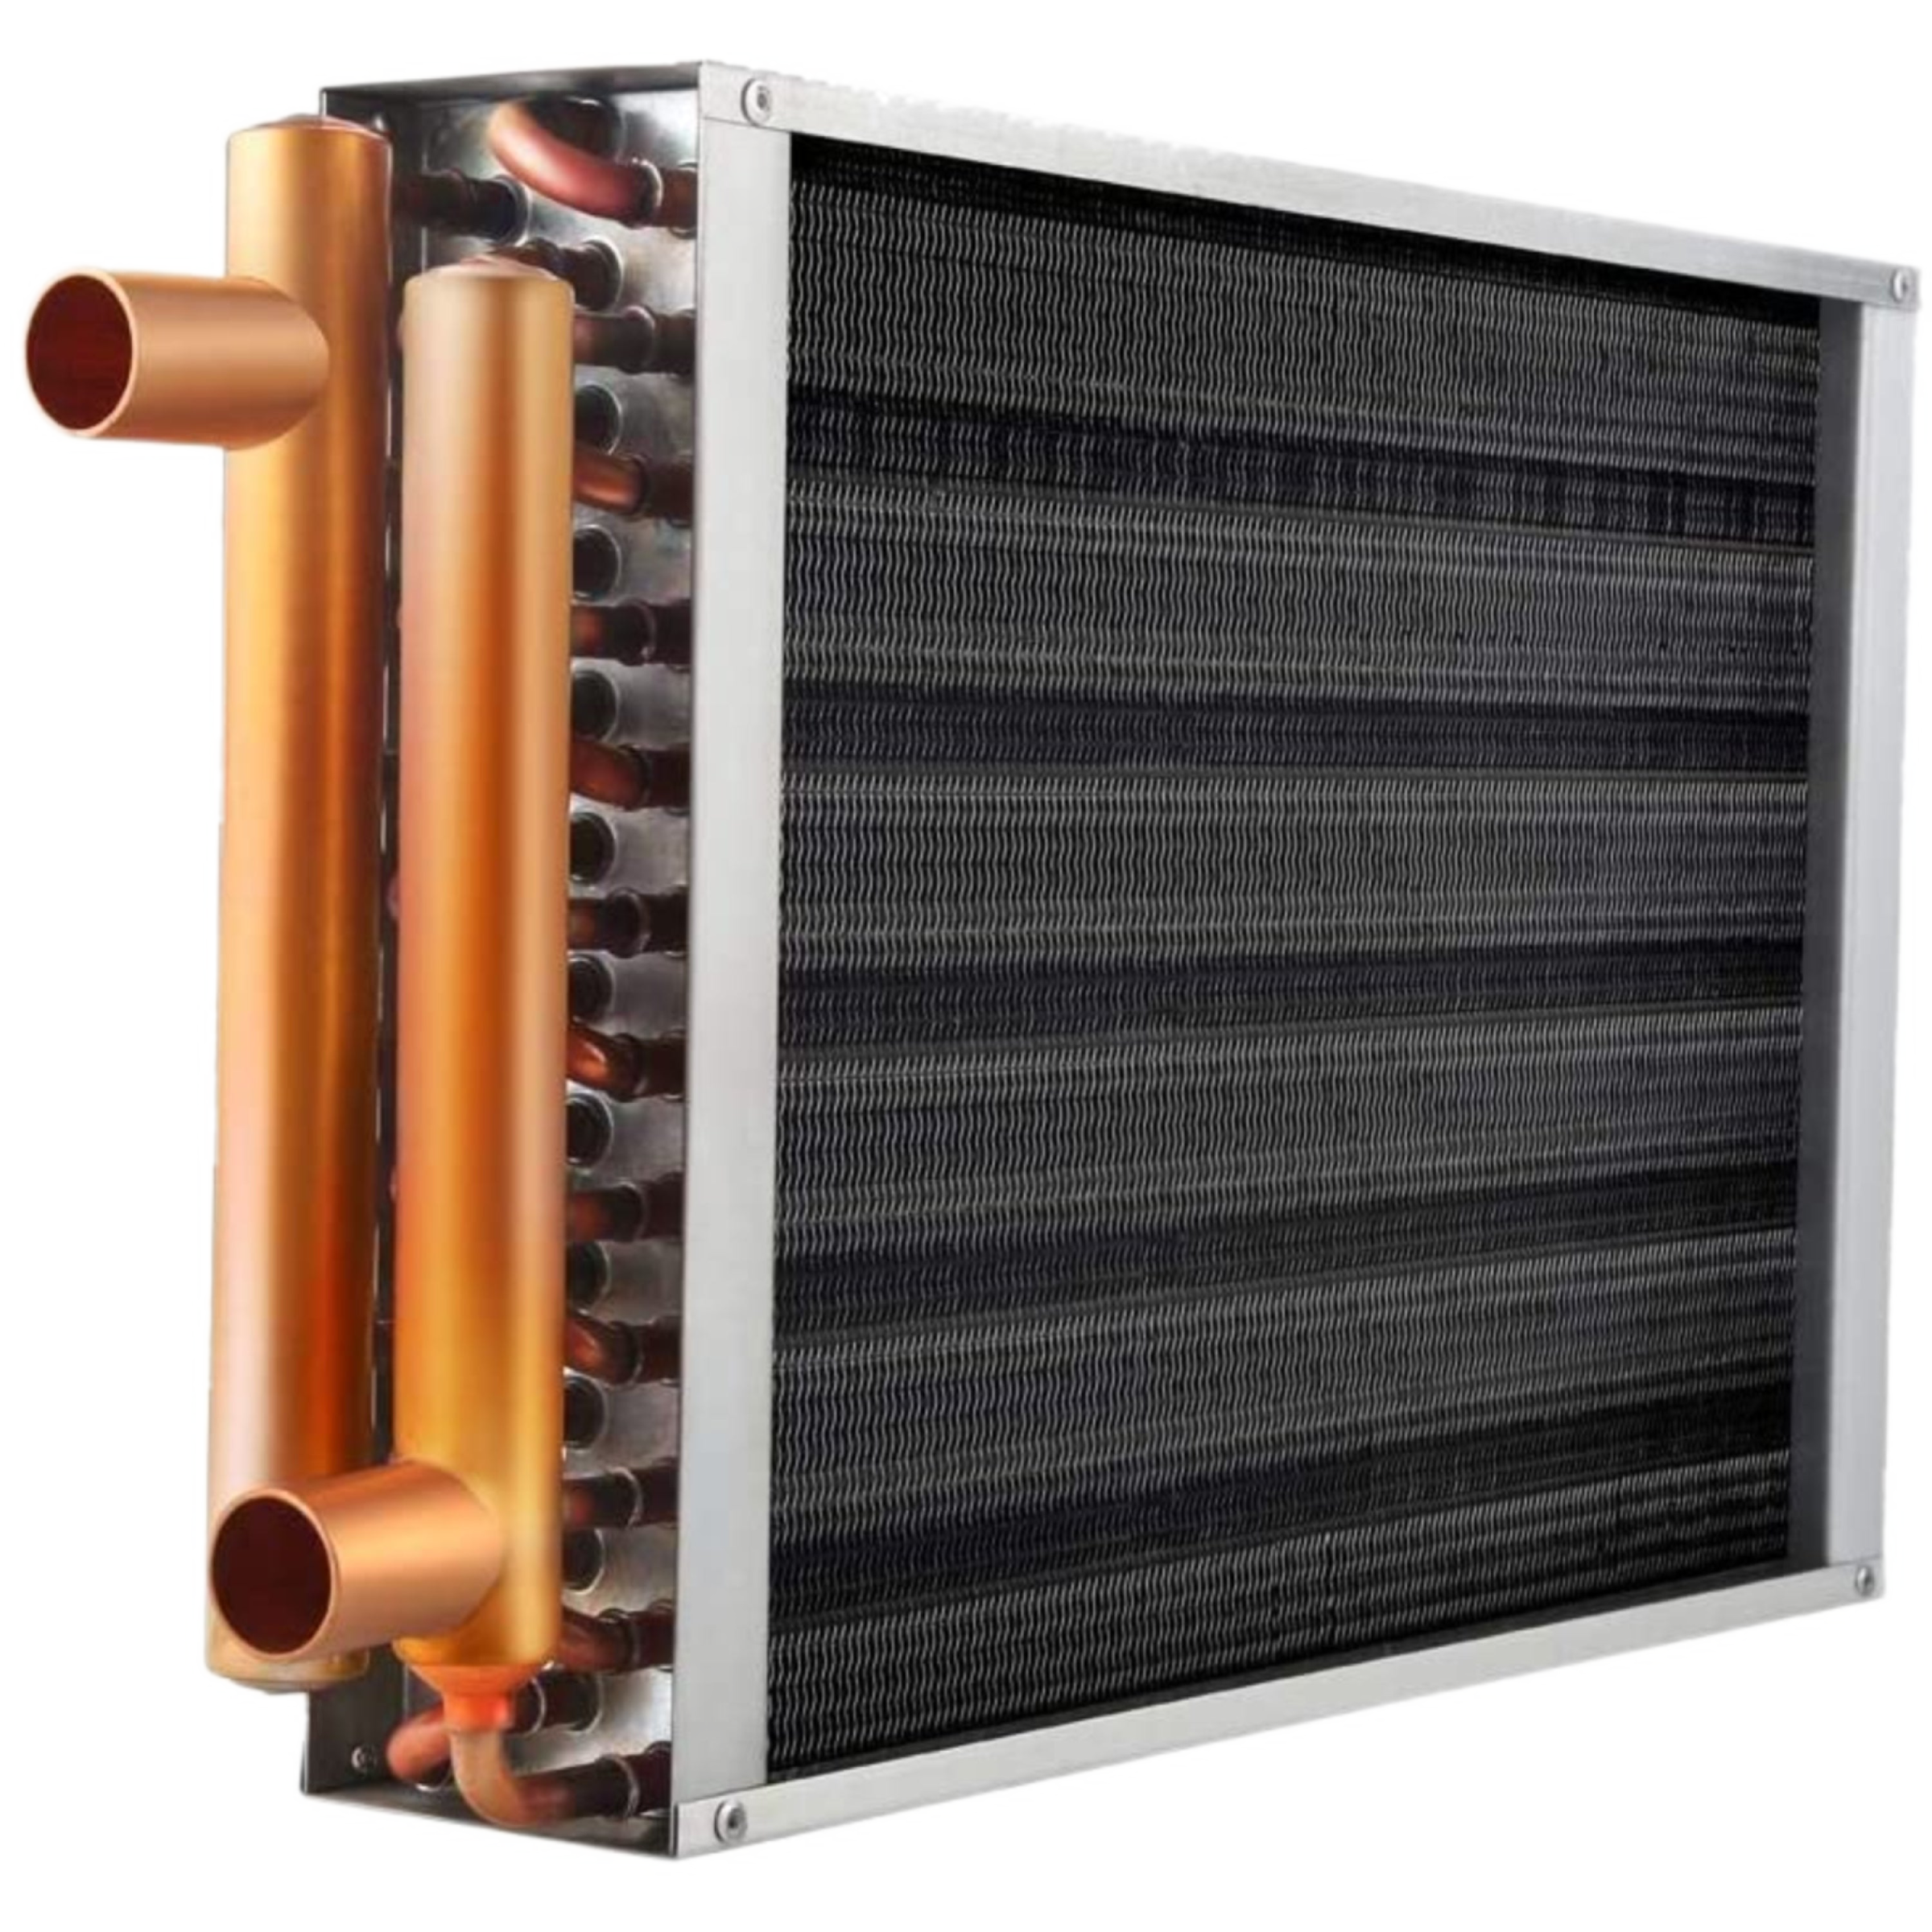 HTL 16 X 16 Hydronic Coil Air to Water Heat Exchanger 8GPM, PD 0.51 PSI, 68850 BTU/h to 80000 BTU/h